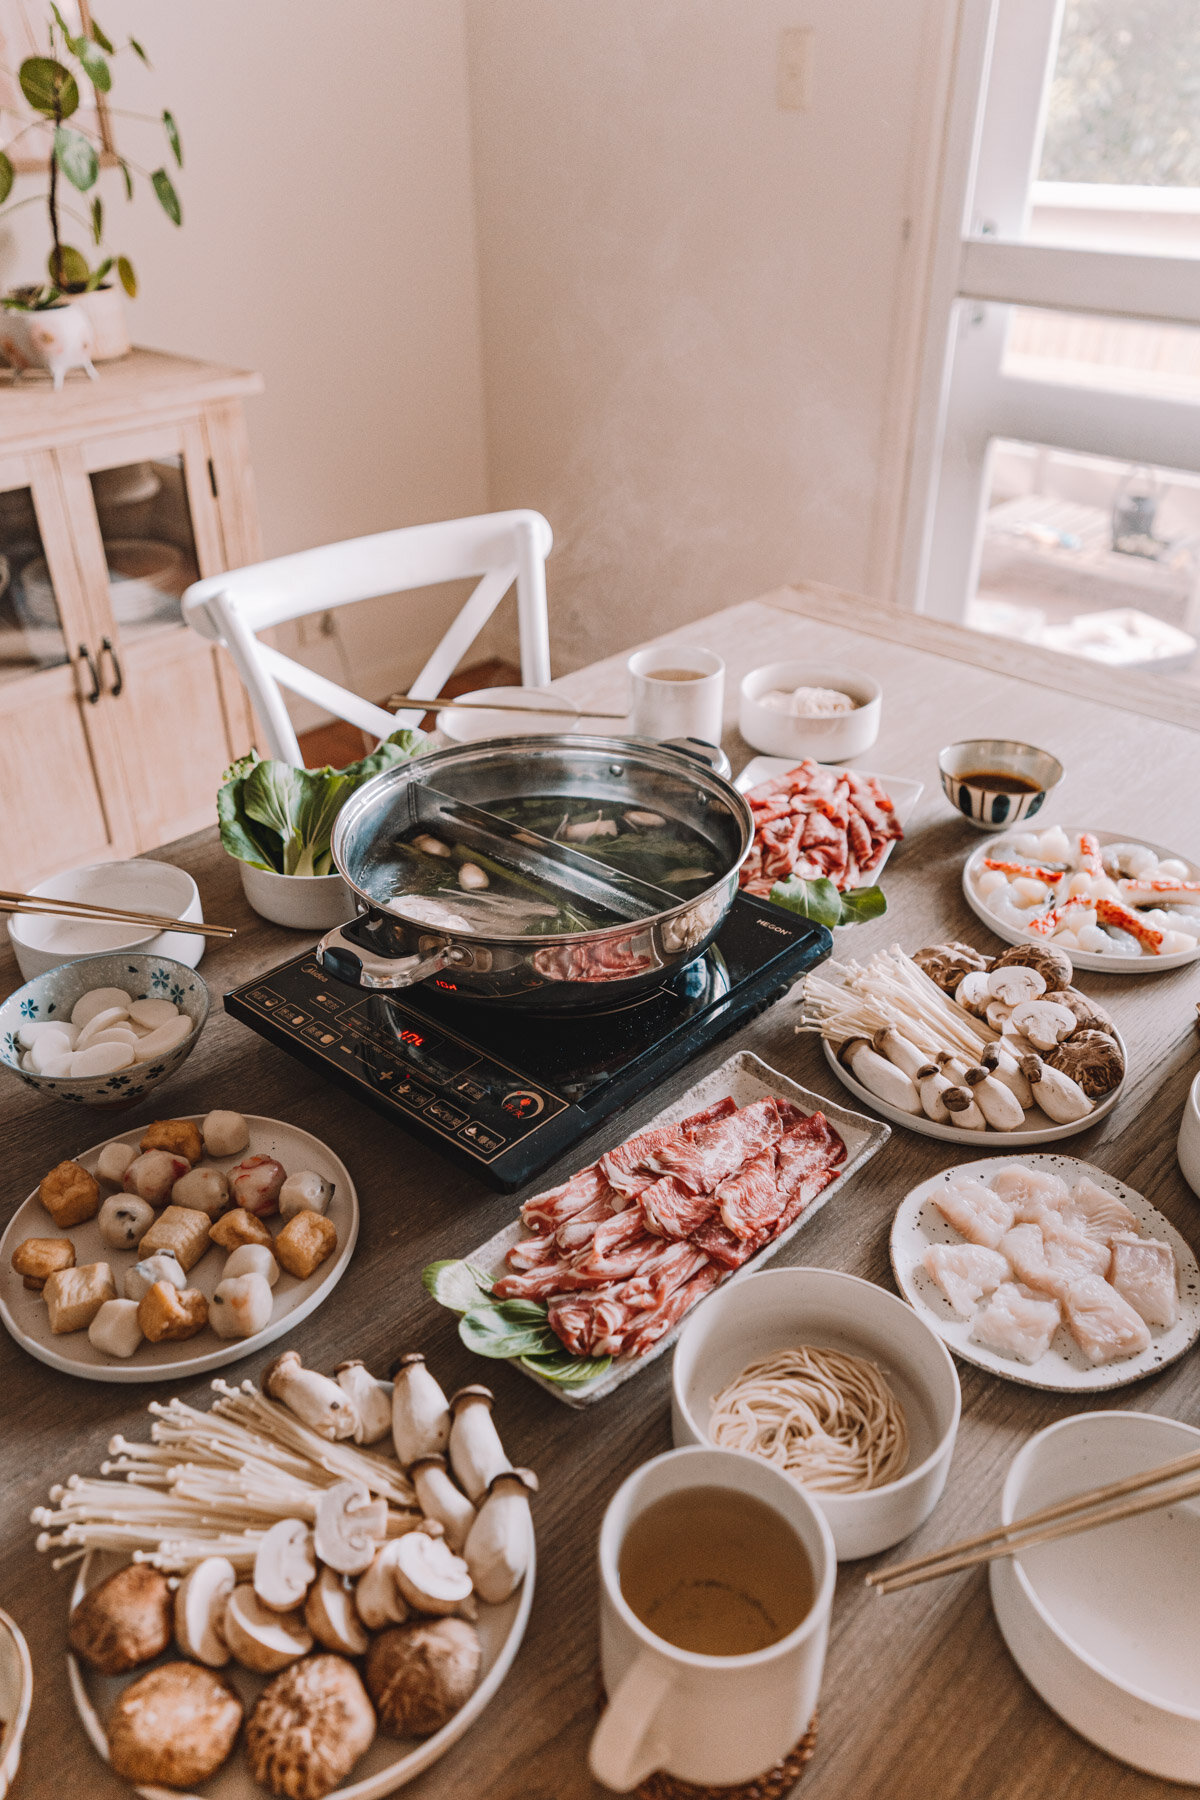 How to Prepare Chinese Hot Pot (SteamBoat) At Home - The Ultimate